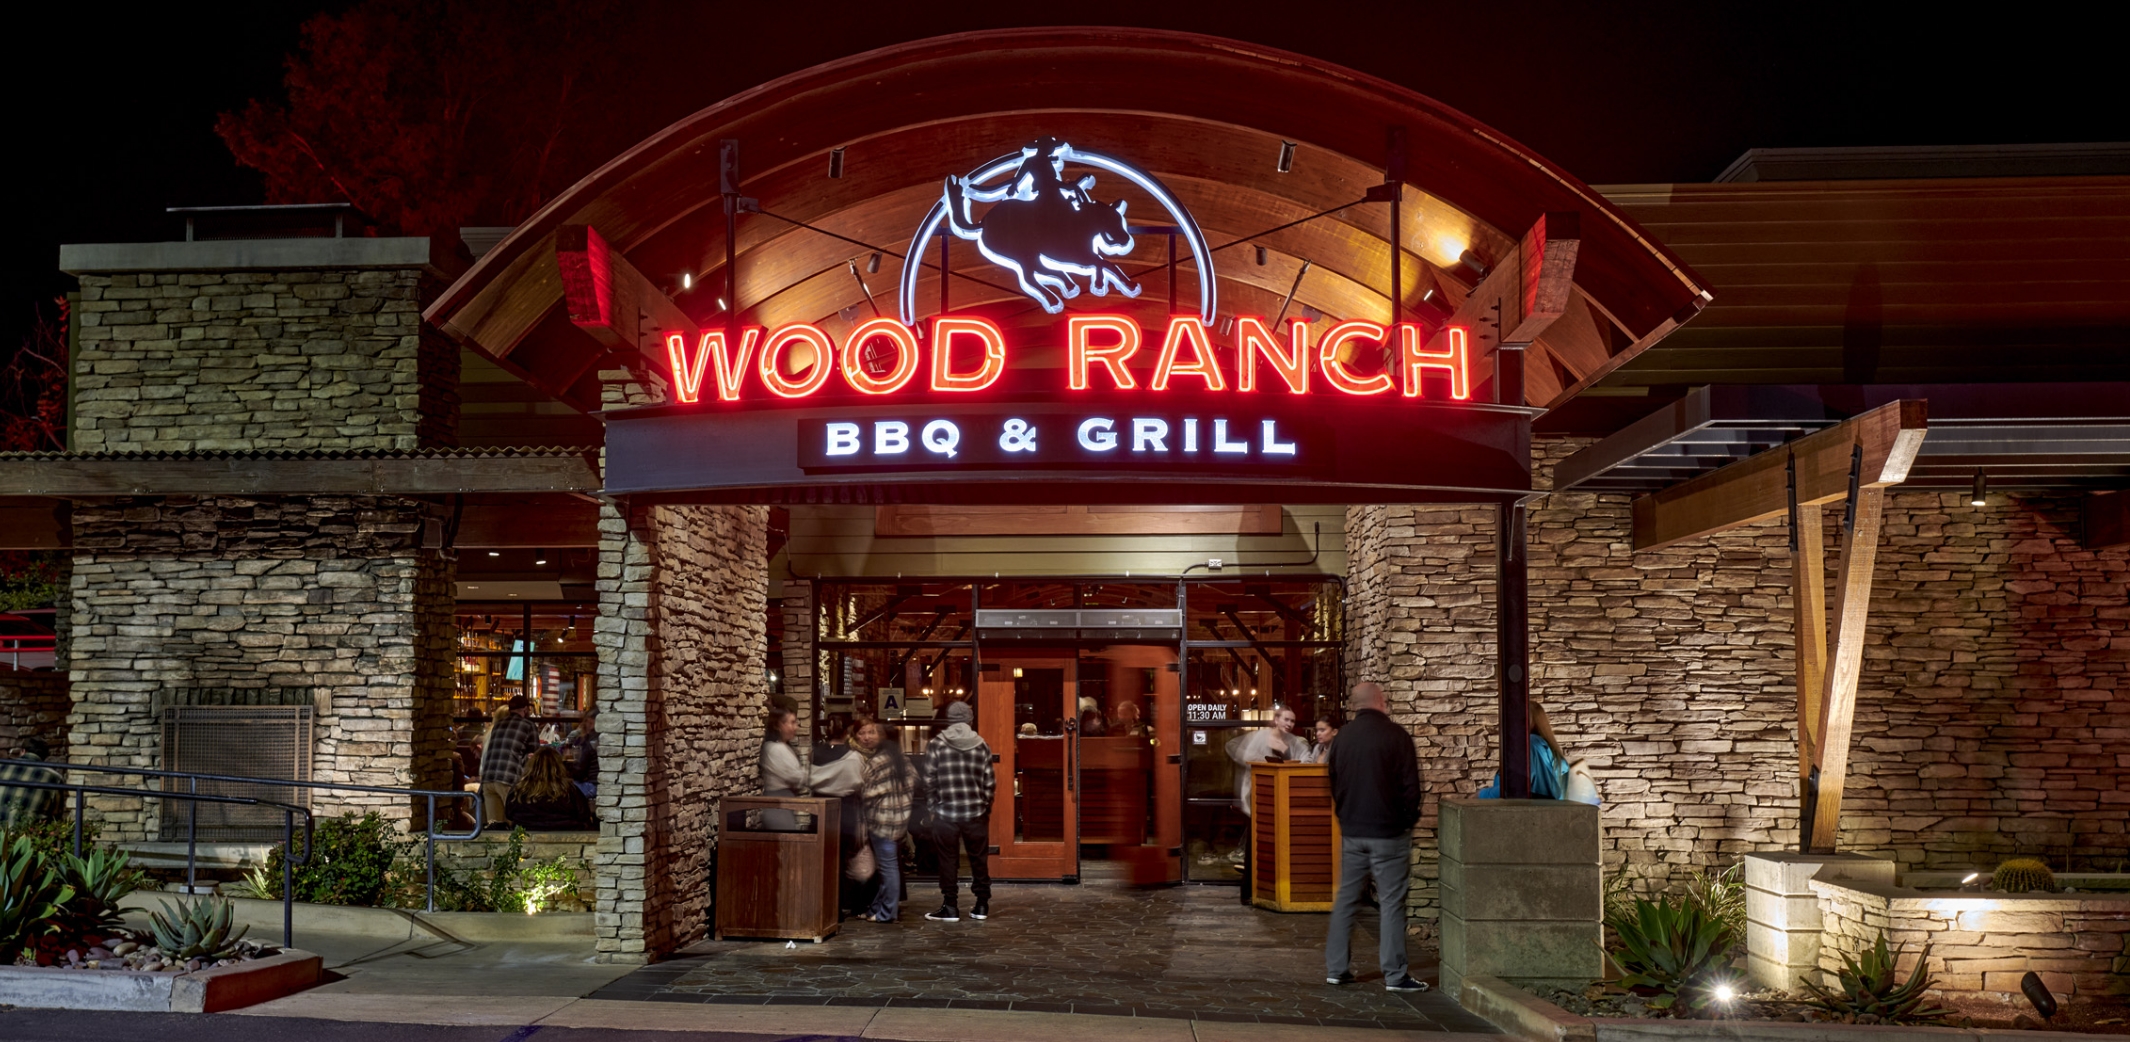 The inviting entrance of Wood Ranch BBQ & Grill Corona at night, featuring the restaurant's radiant red neon sign and bustling activity as guests arrive.